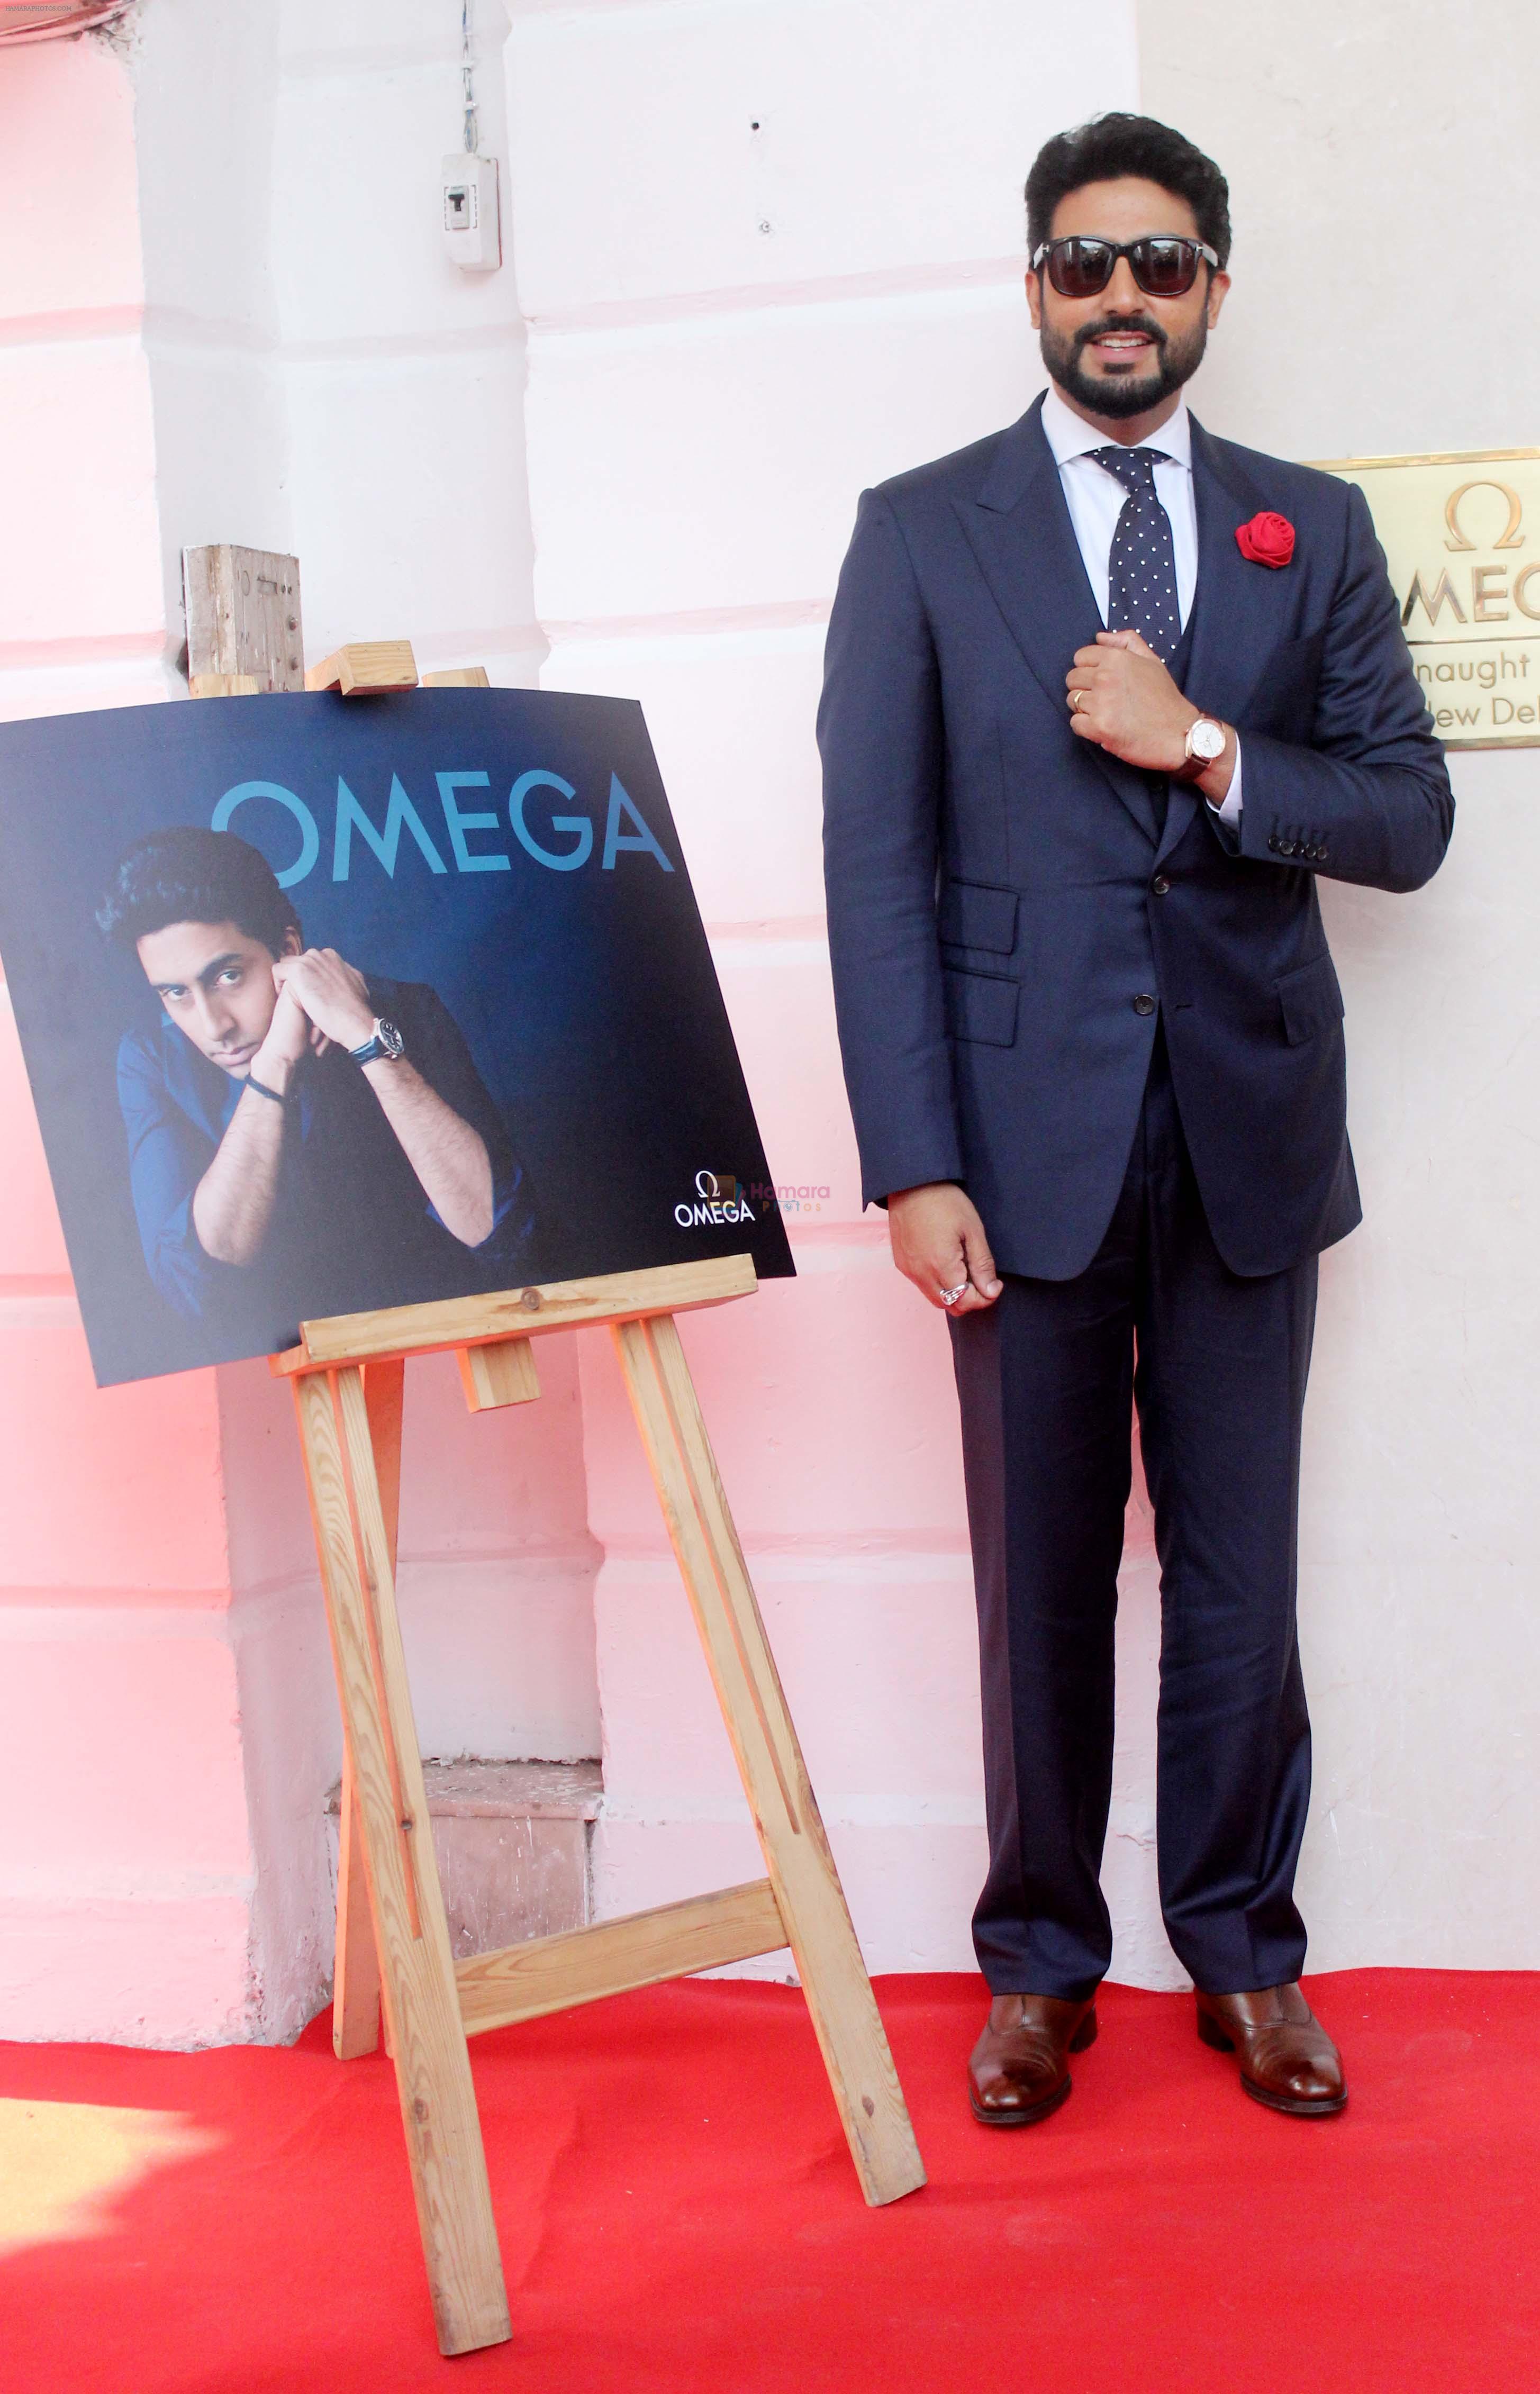 Abhishek Bachchan joins OMEGA in Delhi to celebrate the success of the World�s First Master Chronometer on 18th Nov 2016